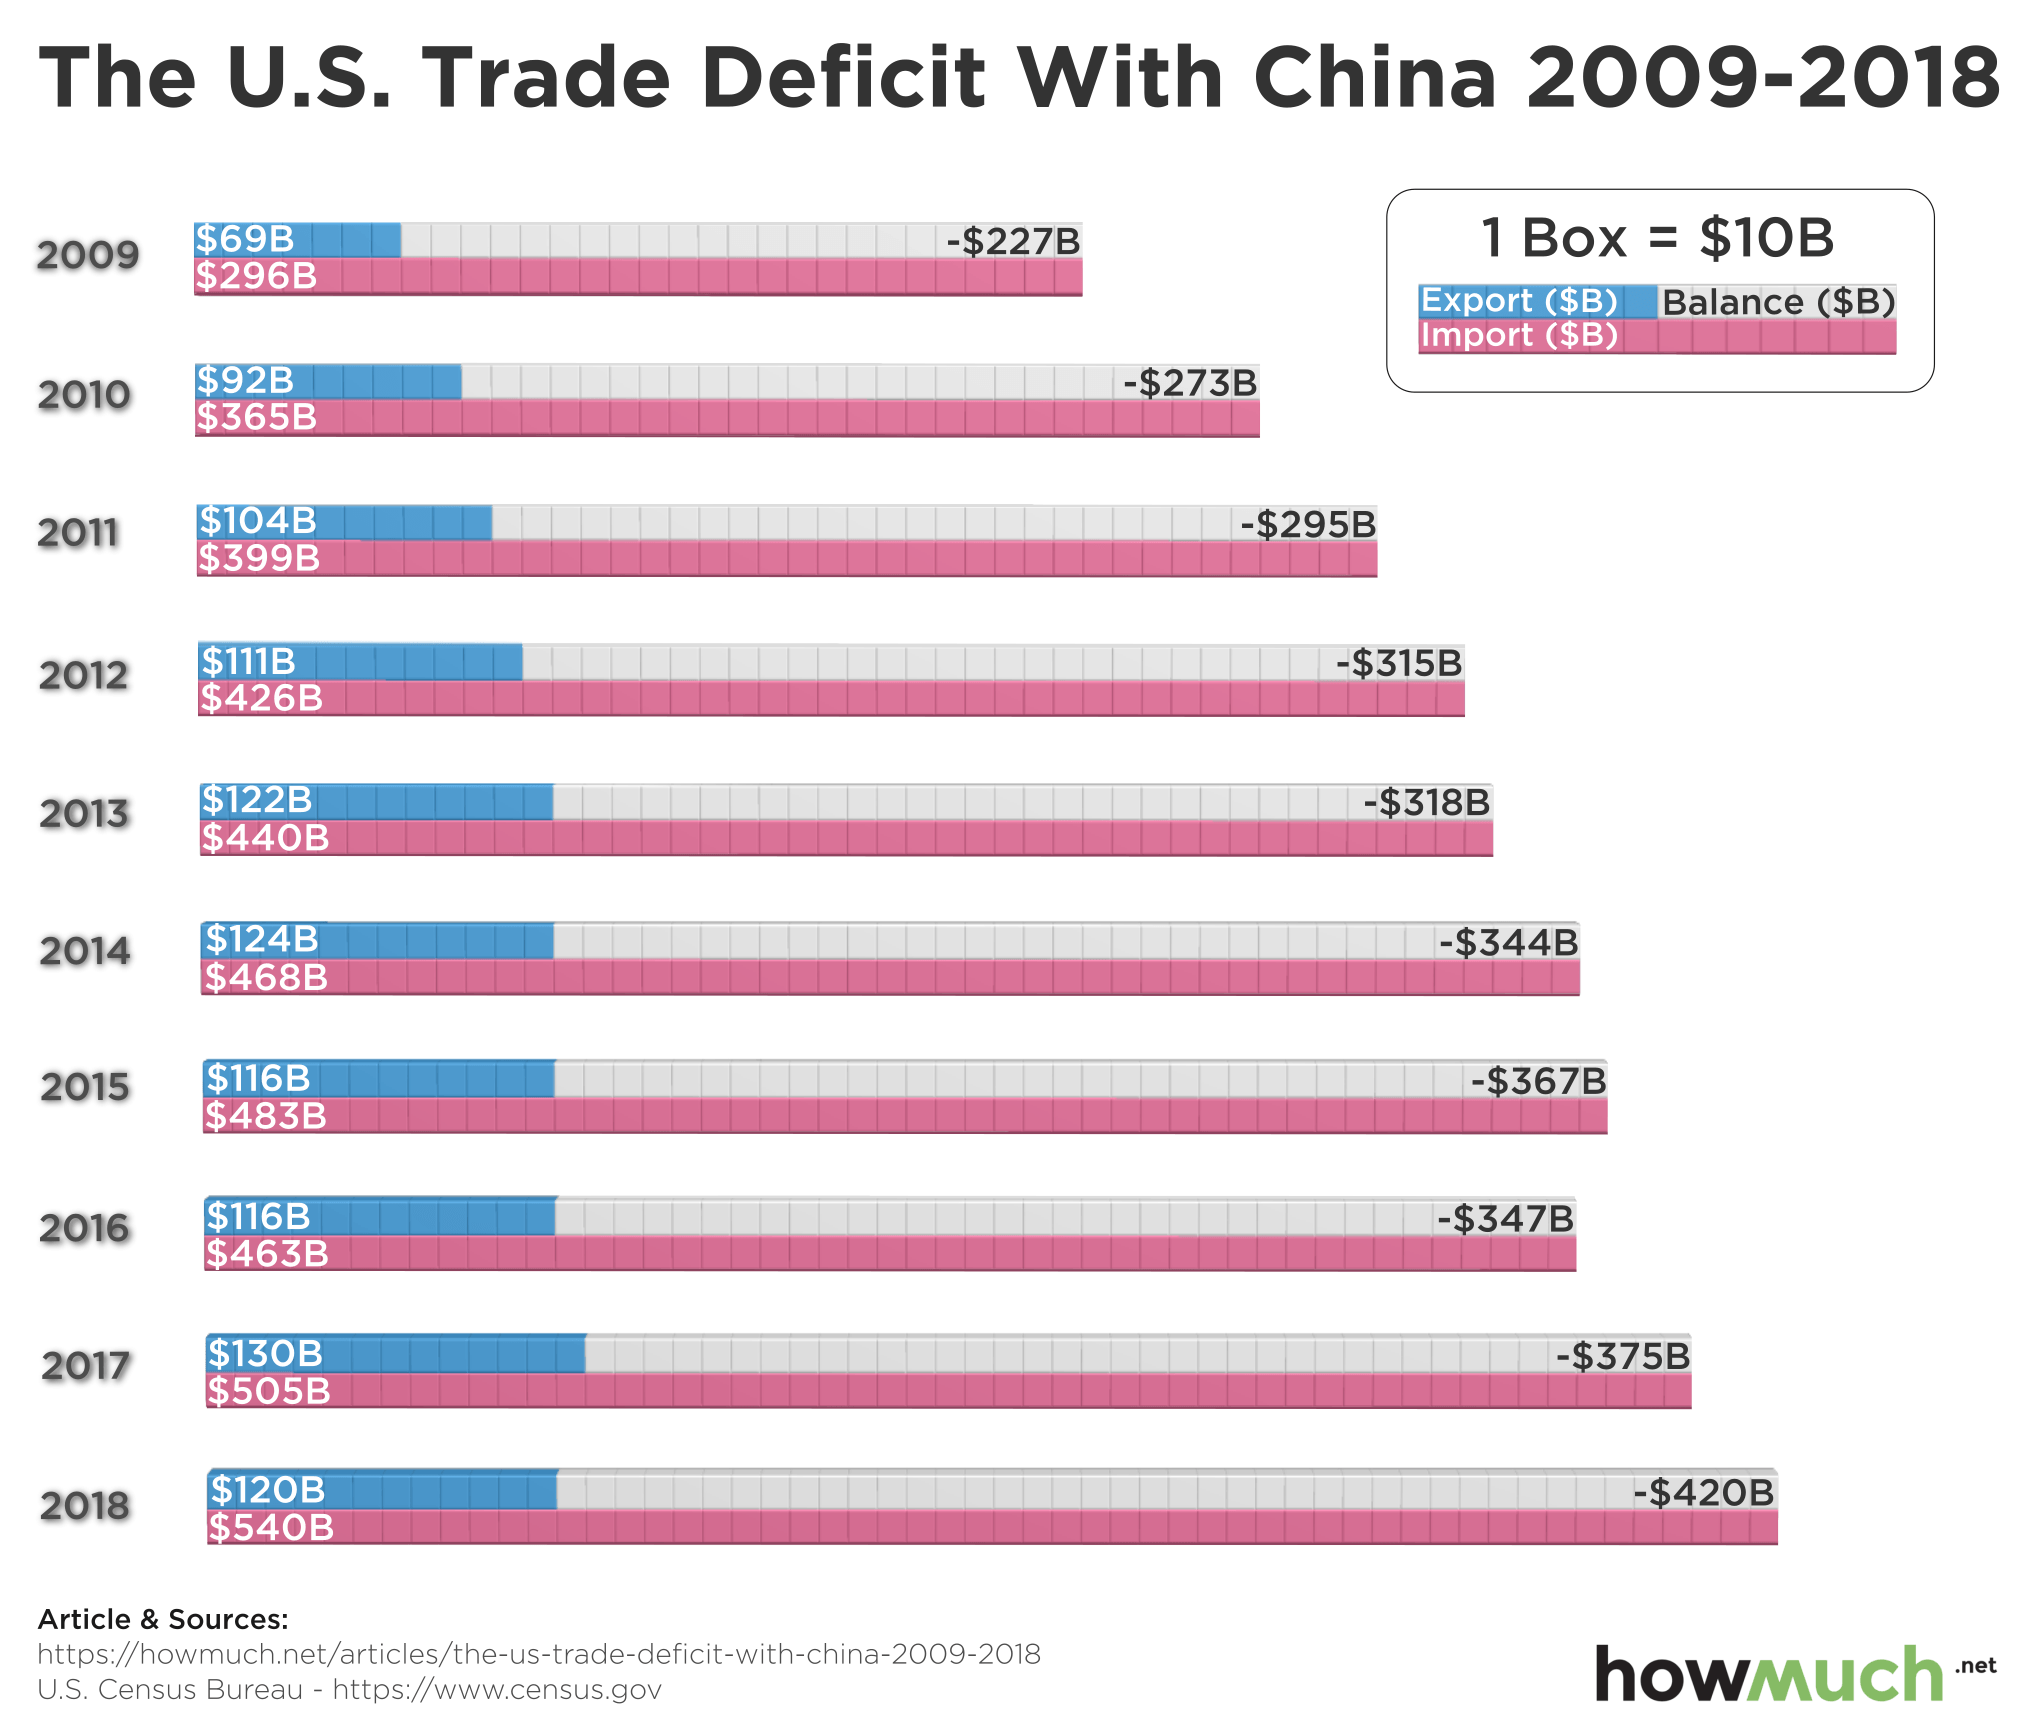 U.S. Trade Deficit With China